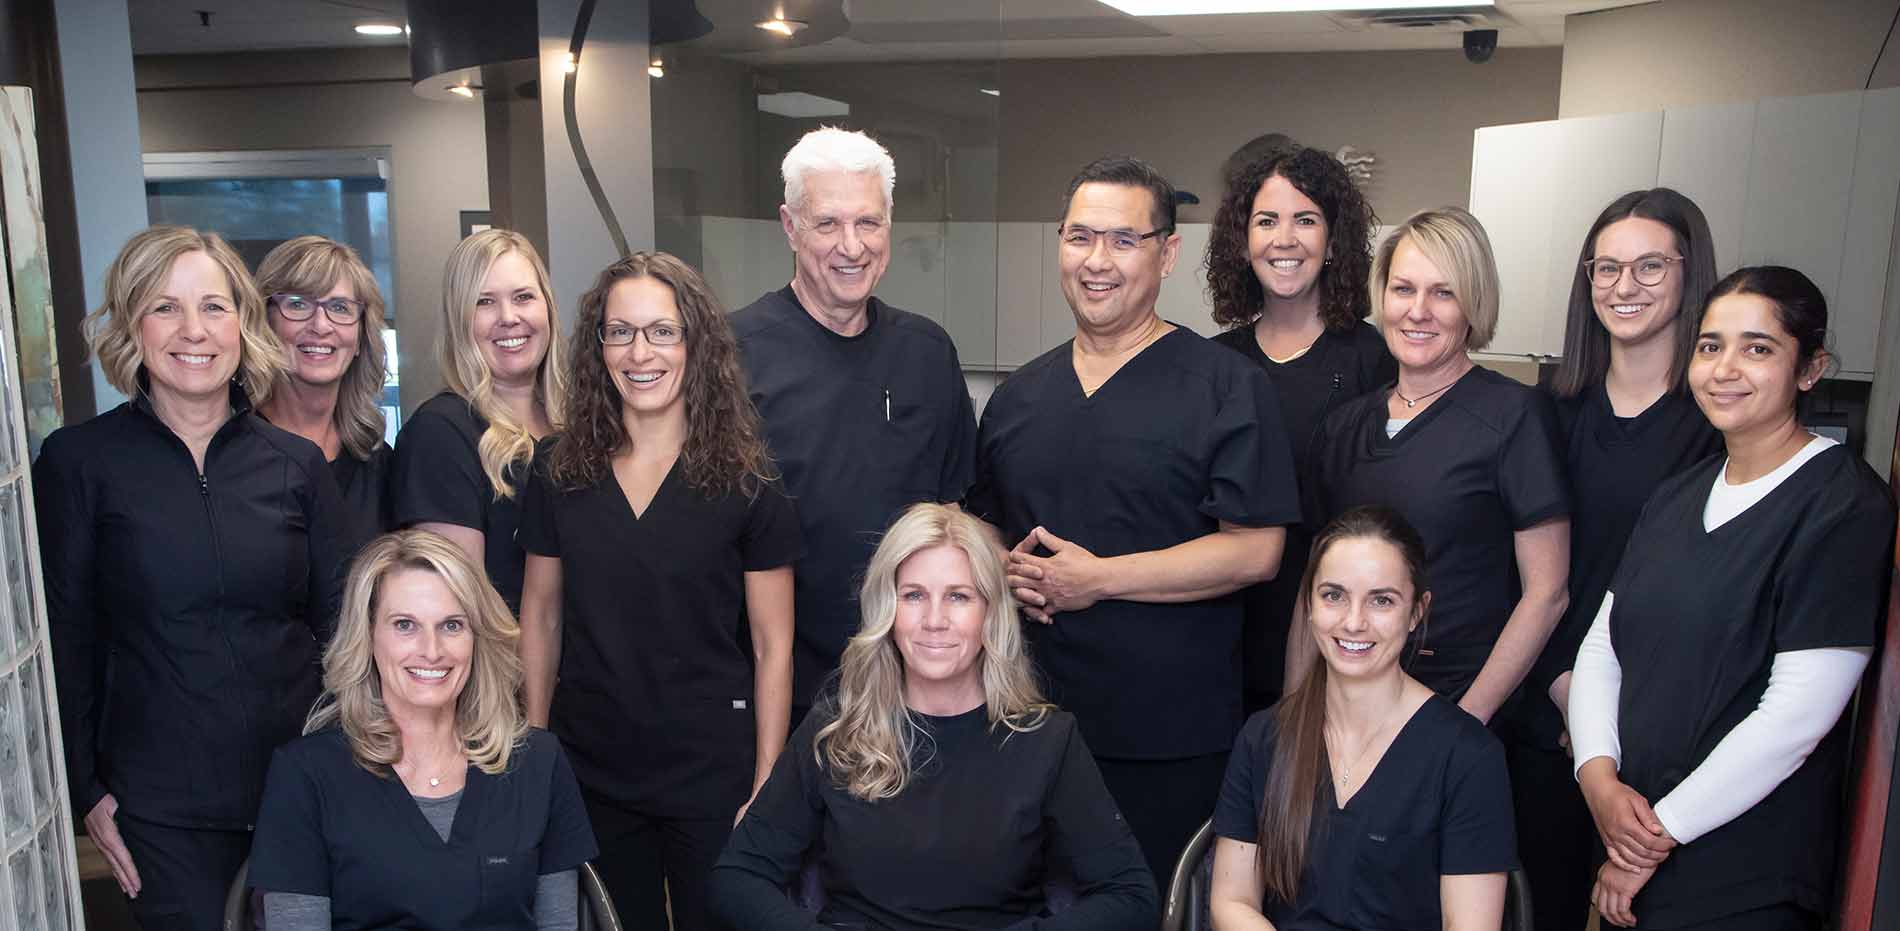 Welcoming New Patients, Calgary Dentists